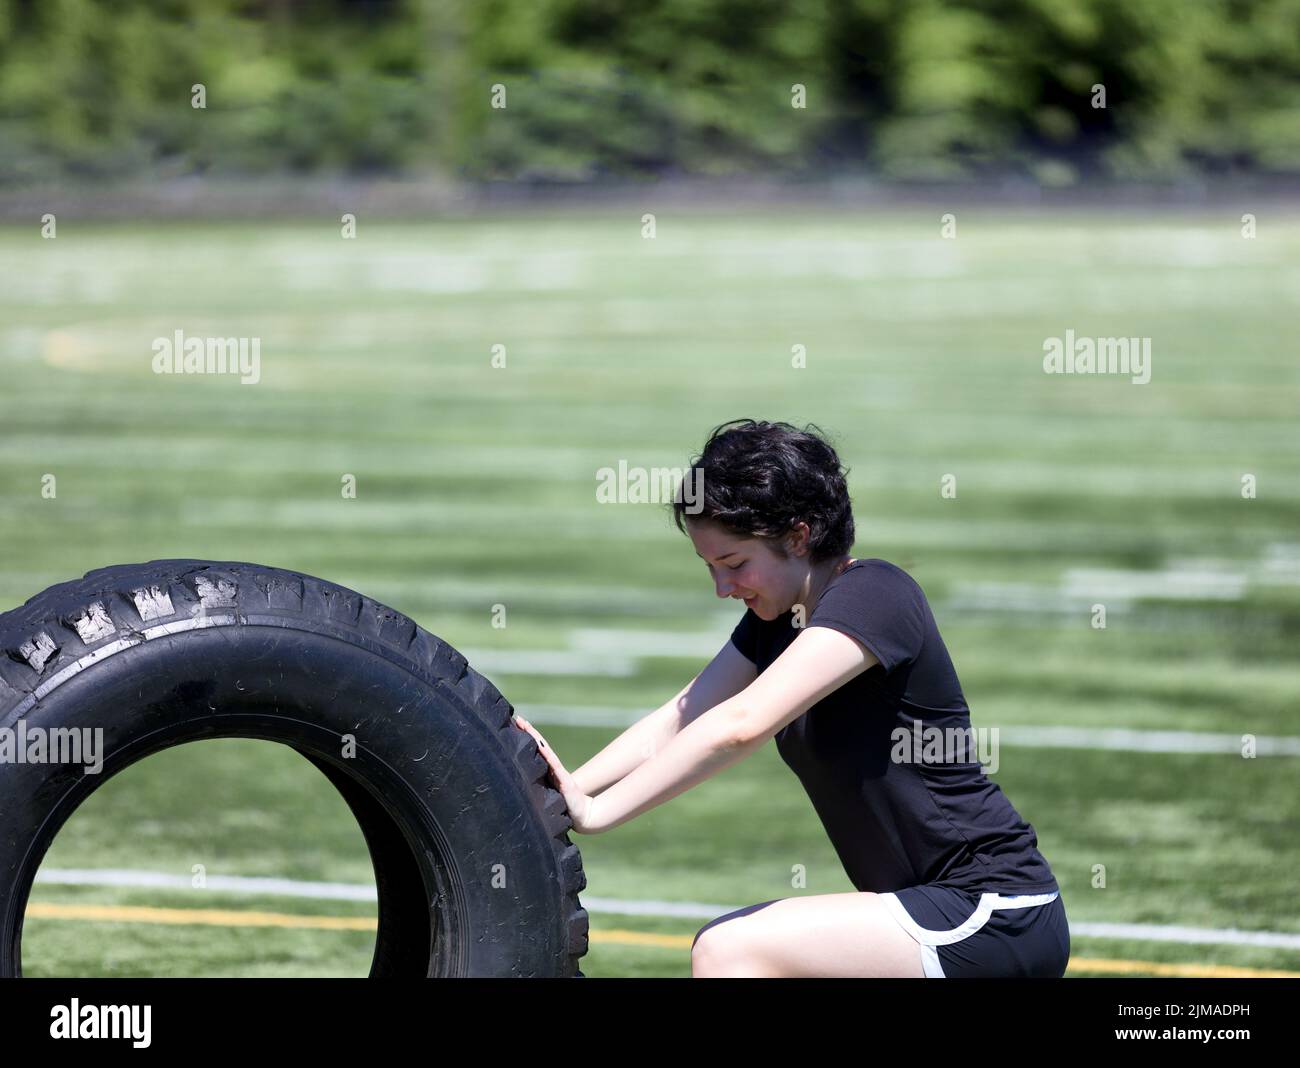 Teen girl pushing heavy old tire on sports field during hot day Stock Photo